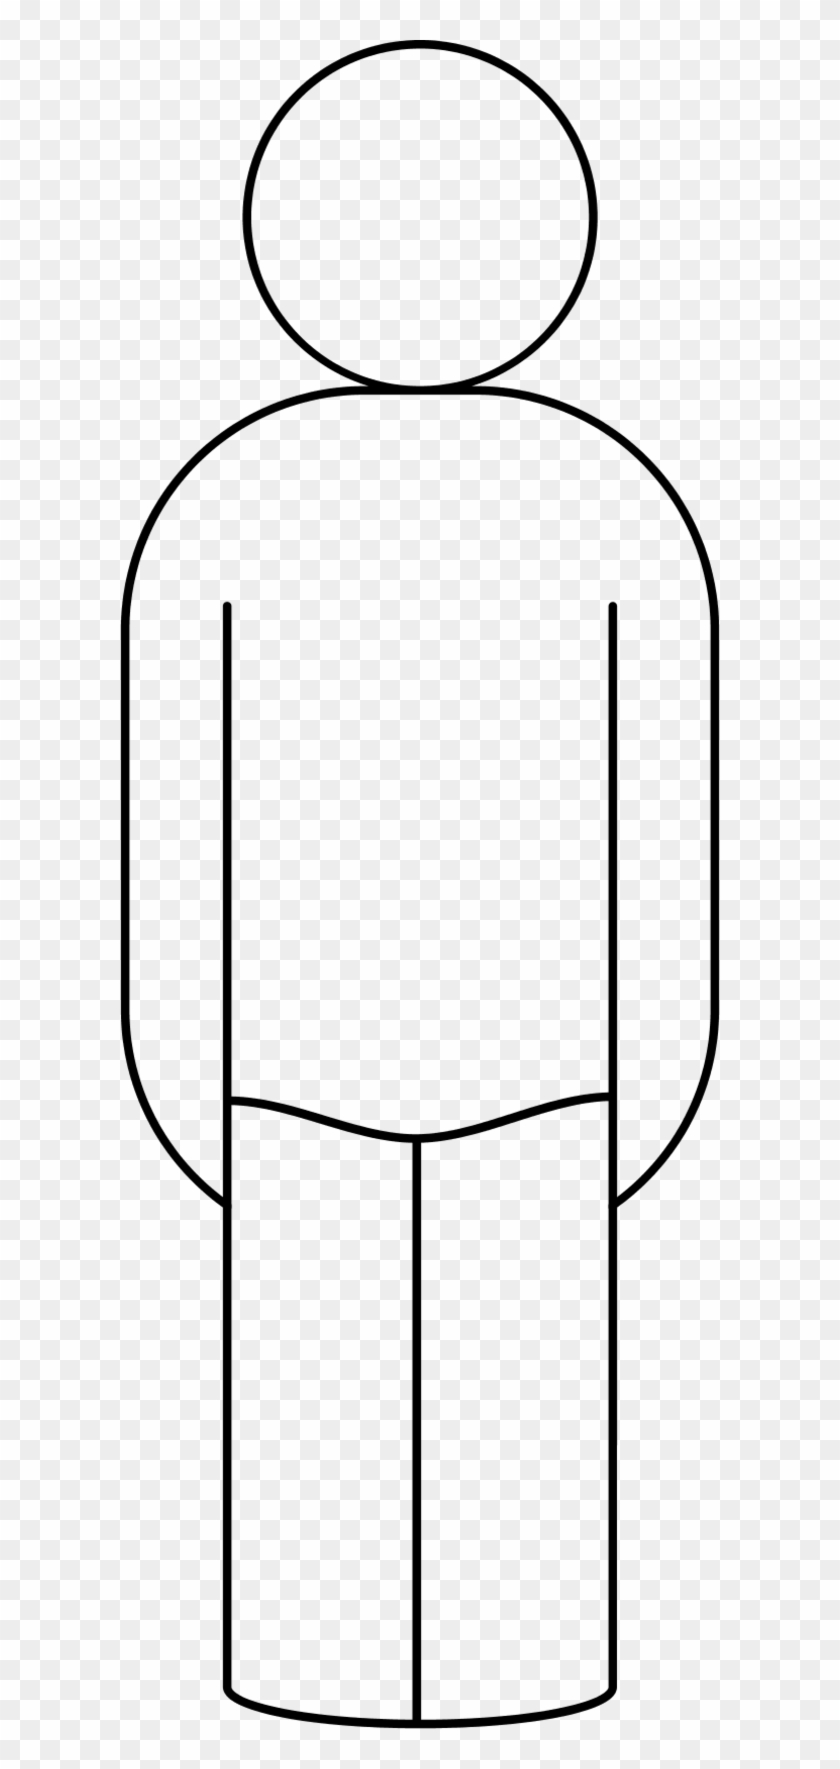 human outline clipart